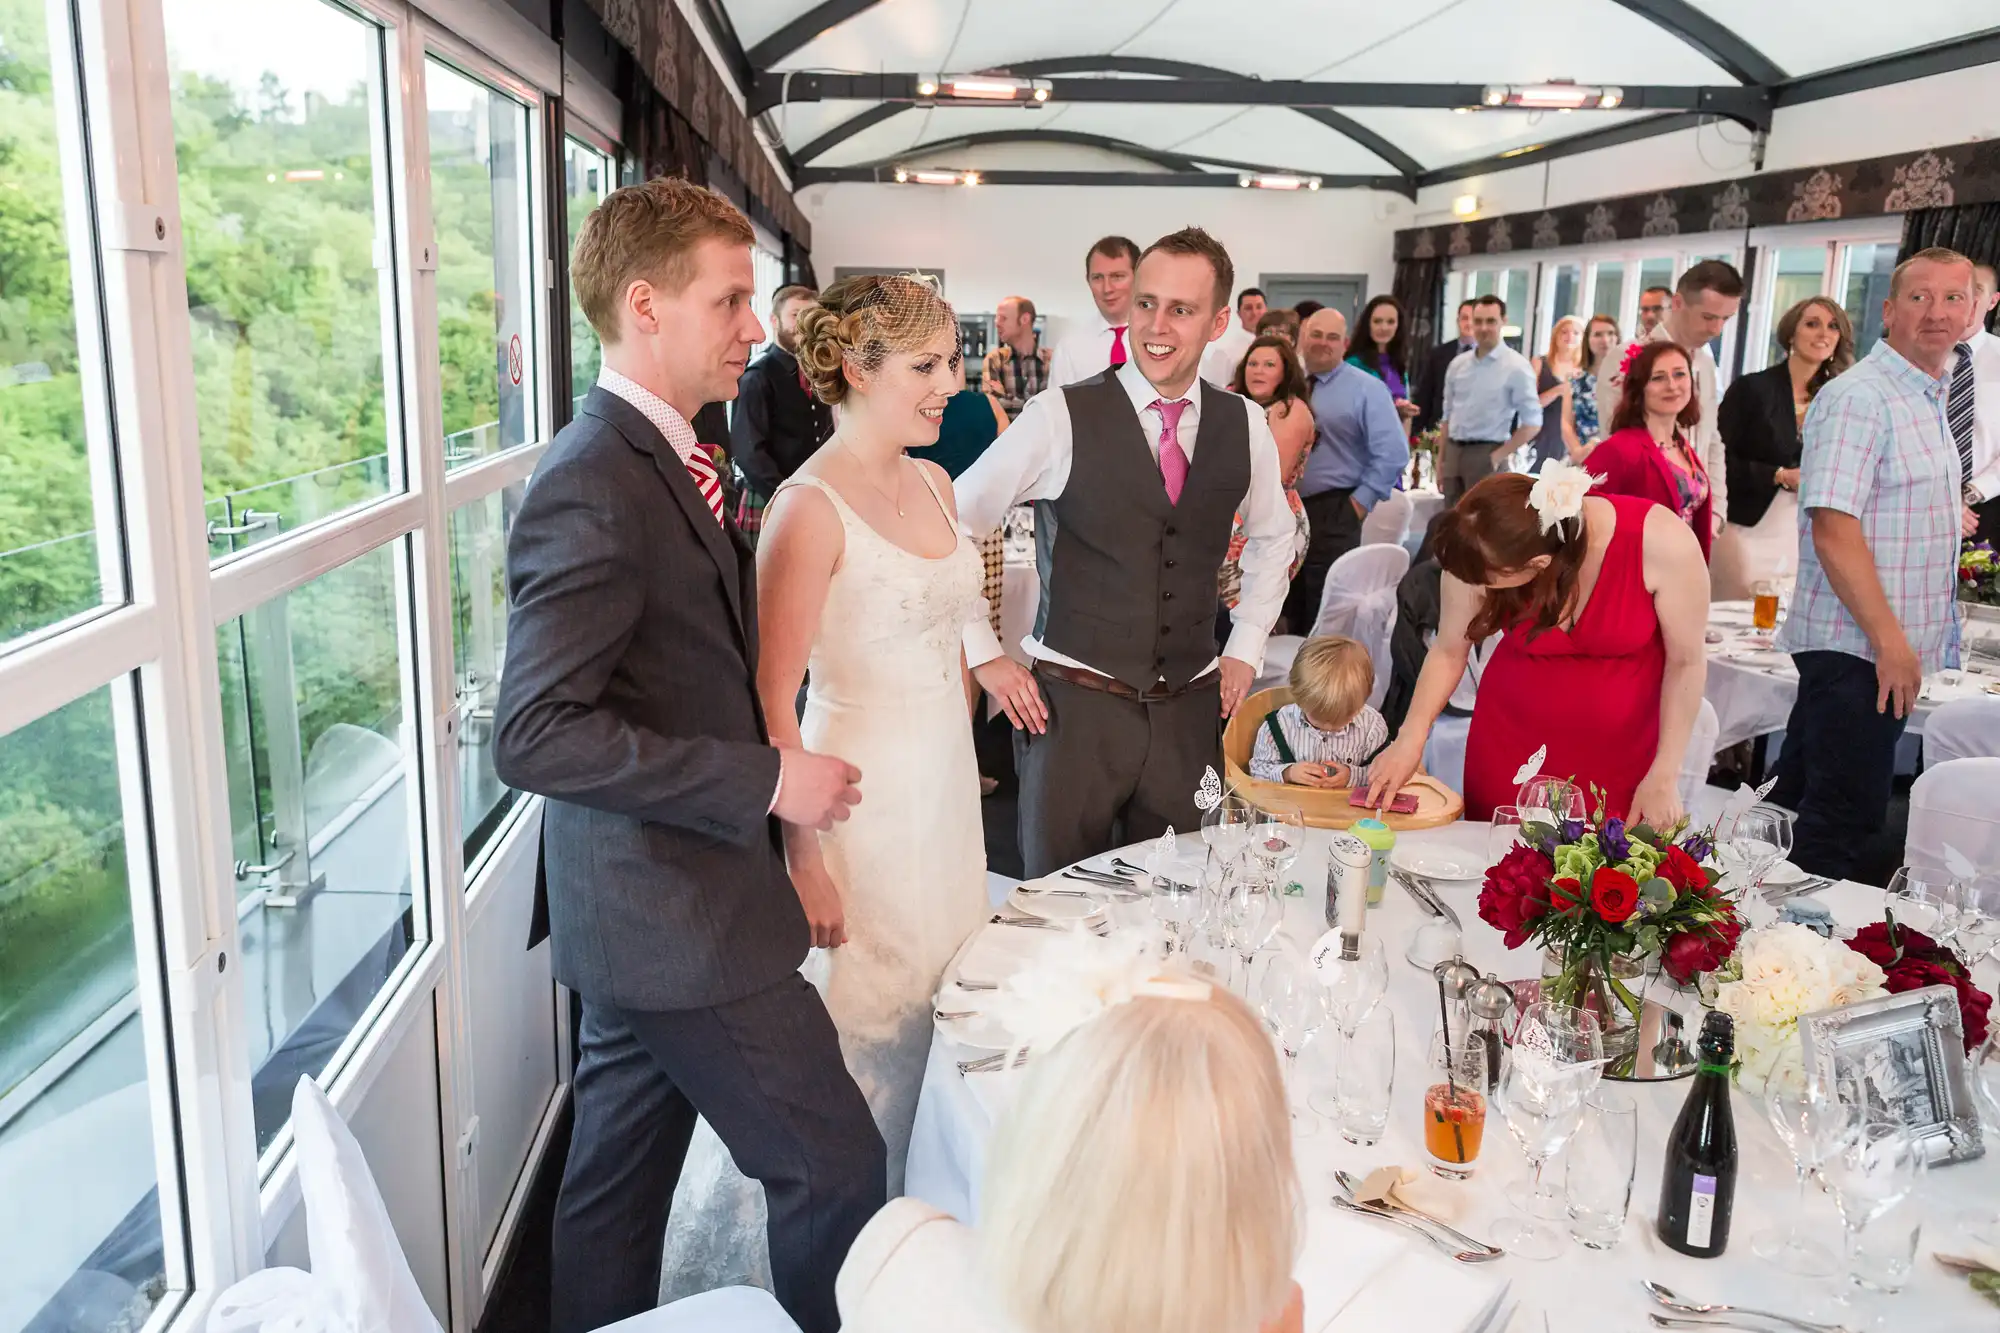 A bride and groom walking through a crowded reception hall with guests around tables adorned with red floral arrangements.